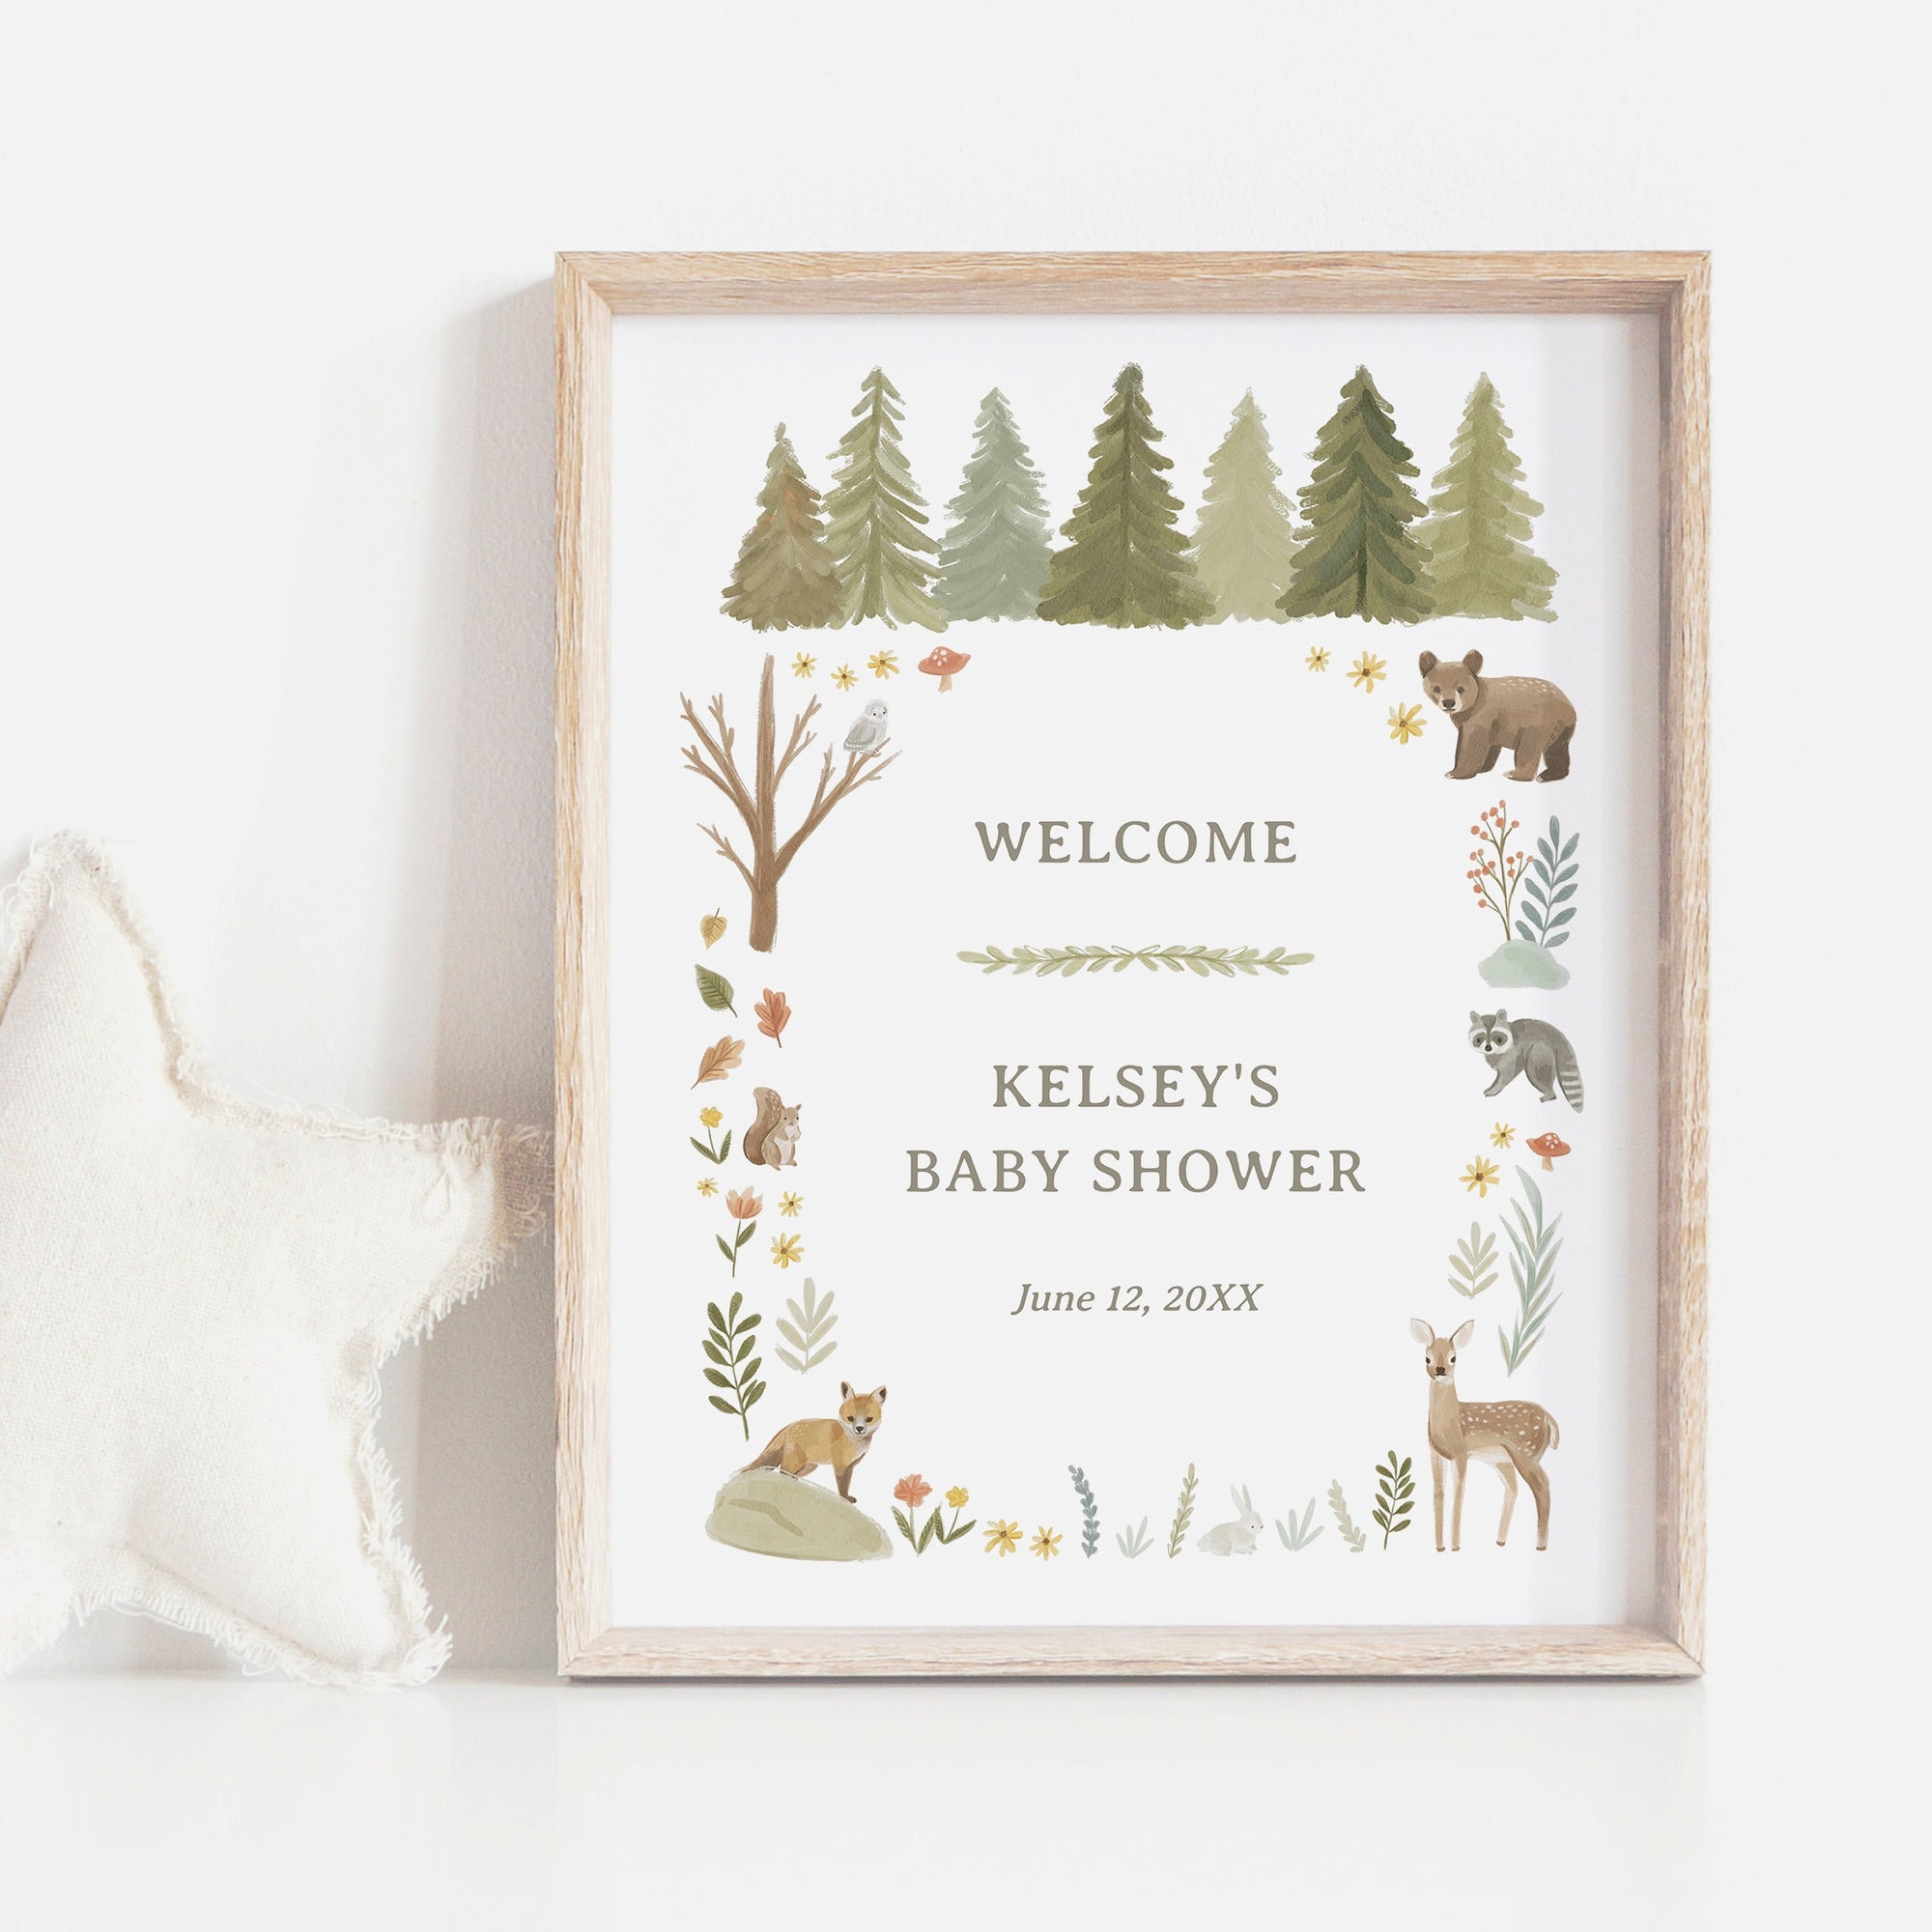 Editable Woodland Baby Shower Welcome Sign, Printable Woodland Animals Welcome Sign Template, DIGITAL DOWNLOAD